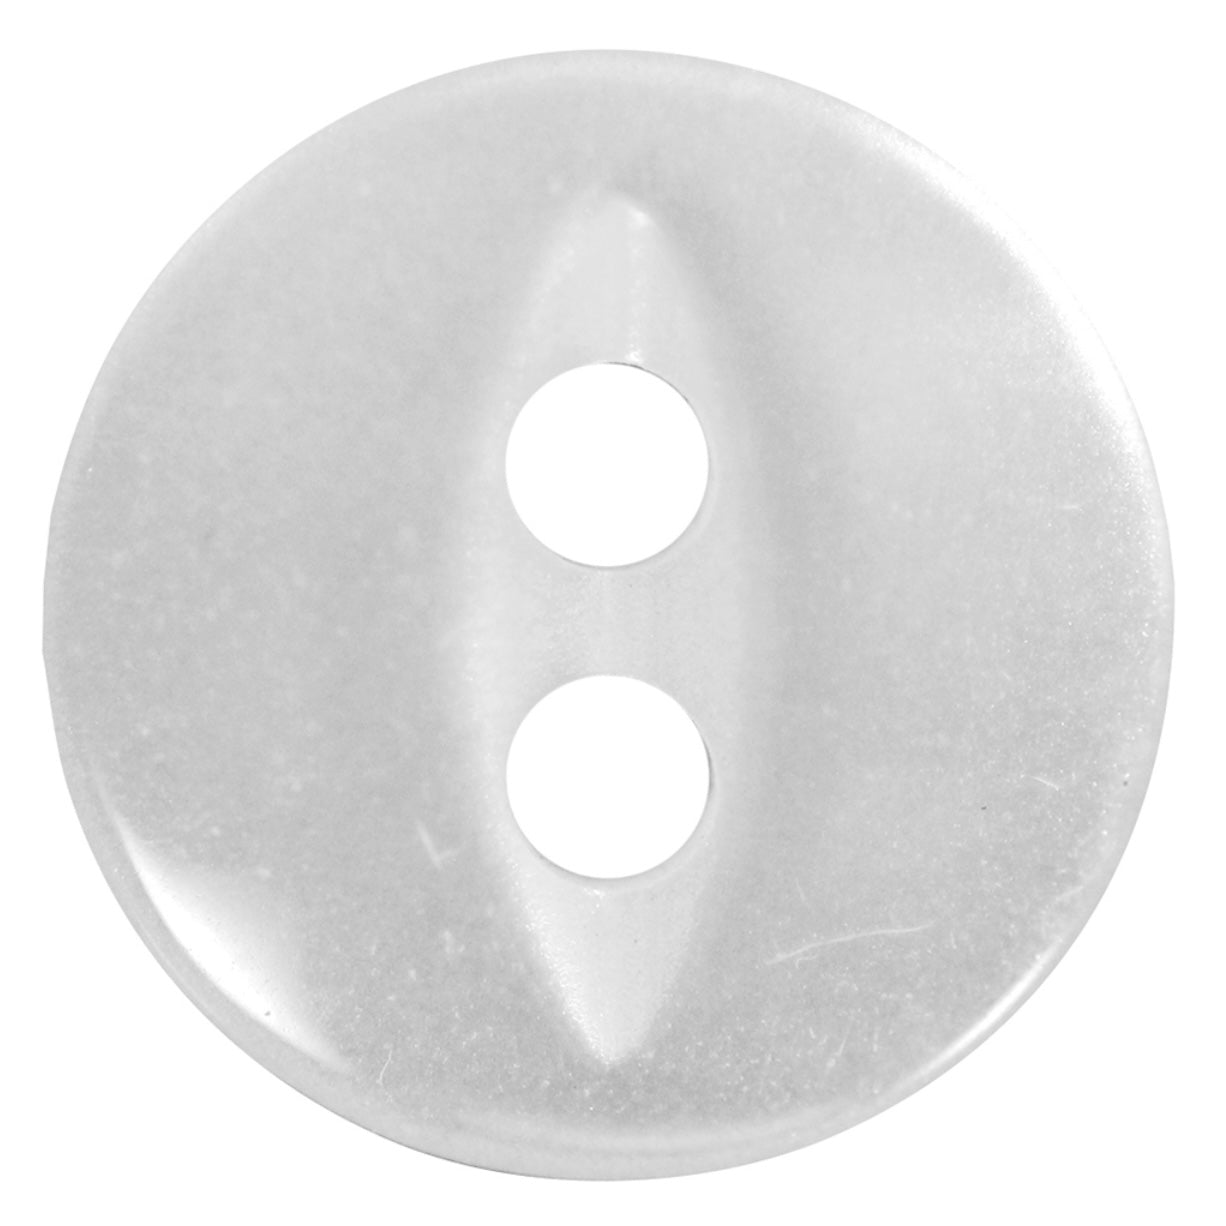 Two-Hole Button - 9mm - White - 6 count